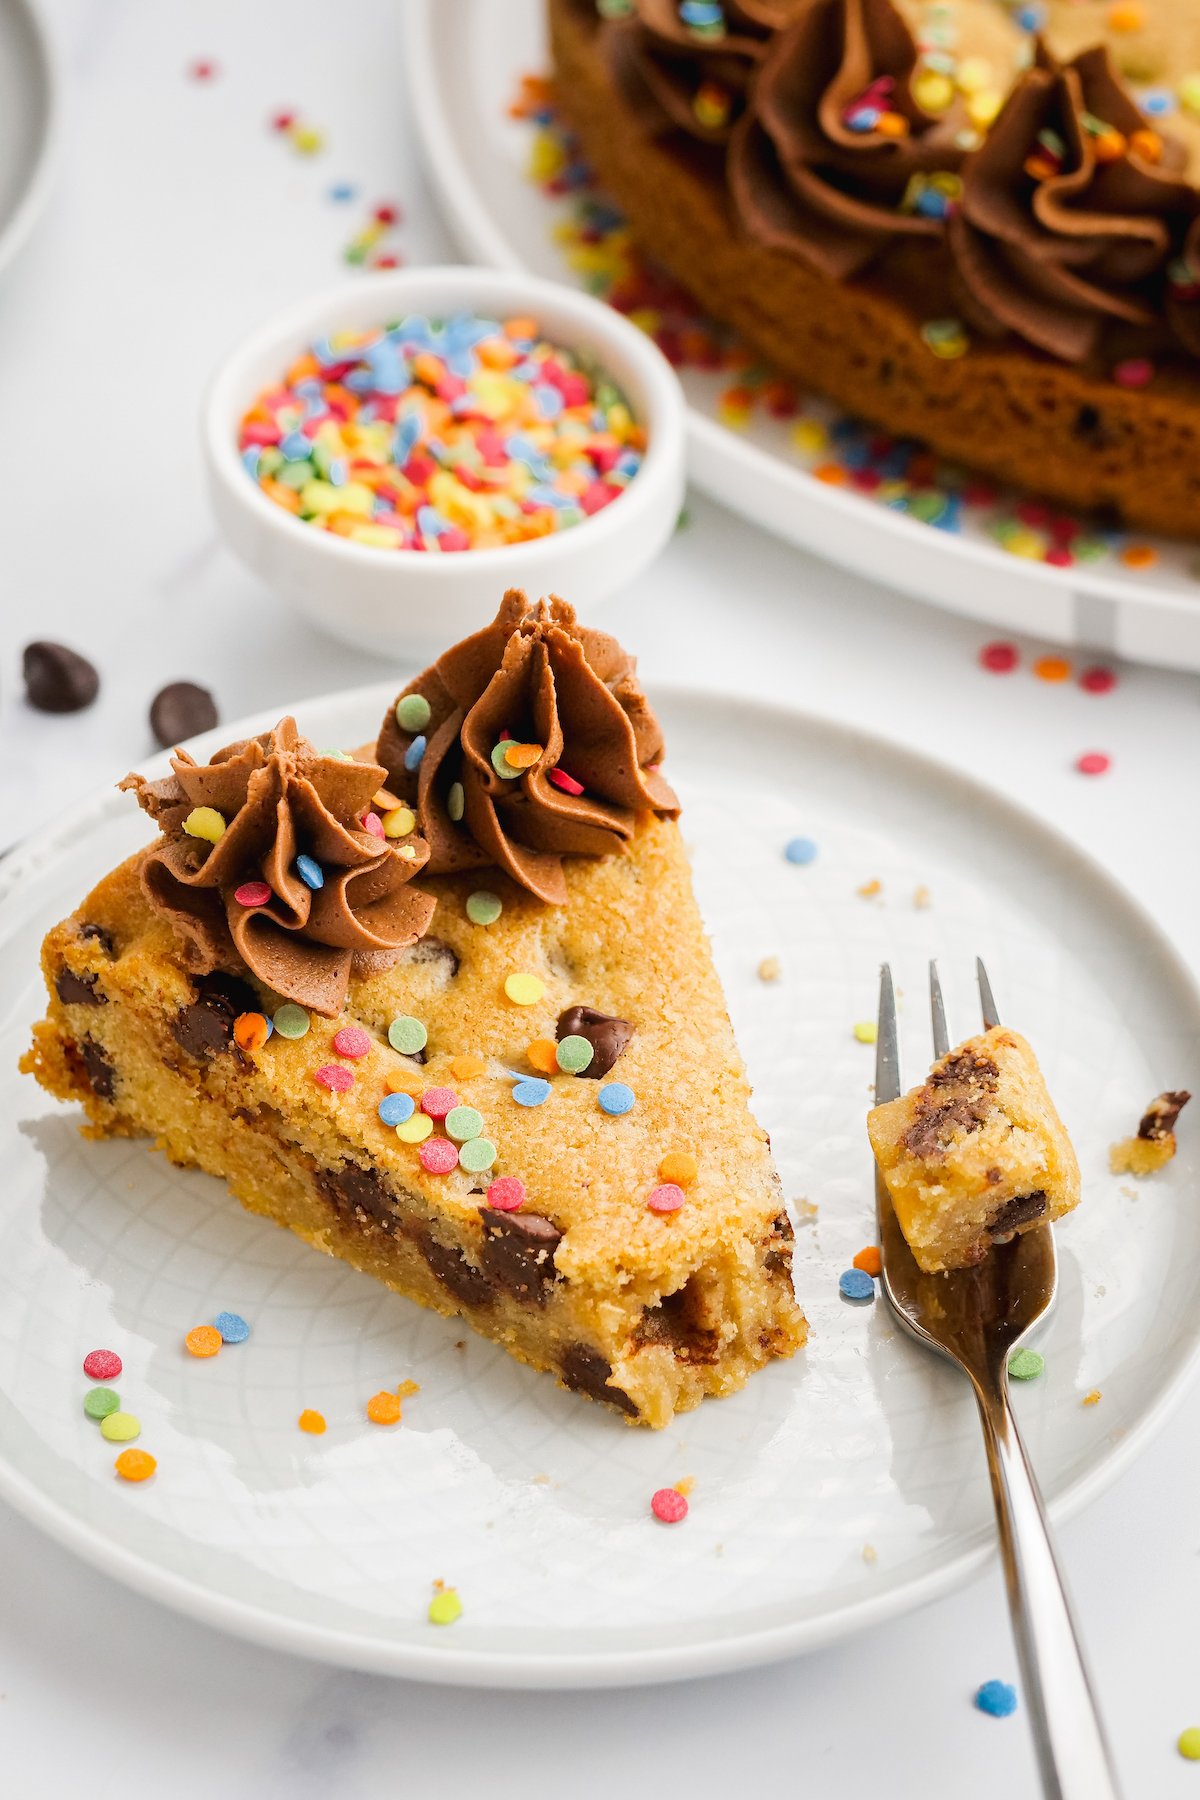 Slice of chocolate chip cookie cake on a plate.